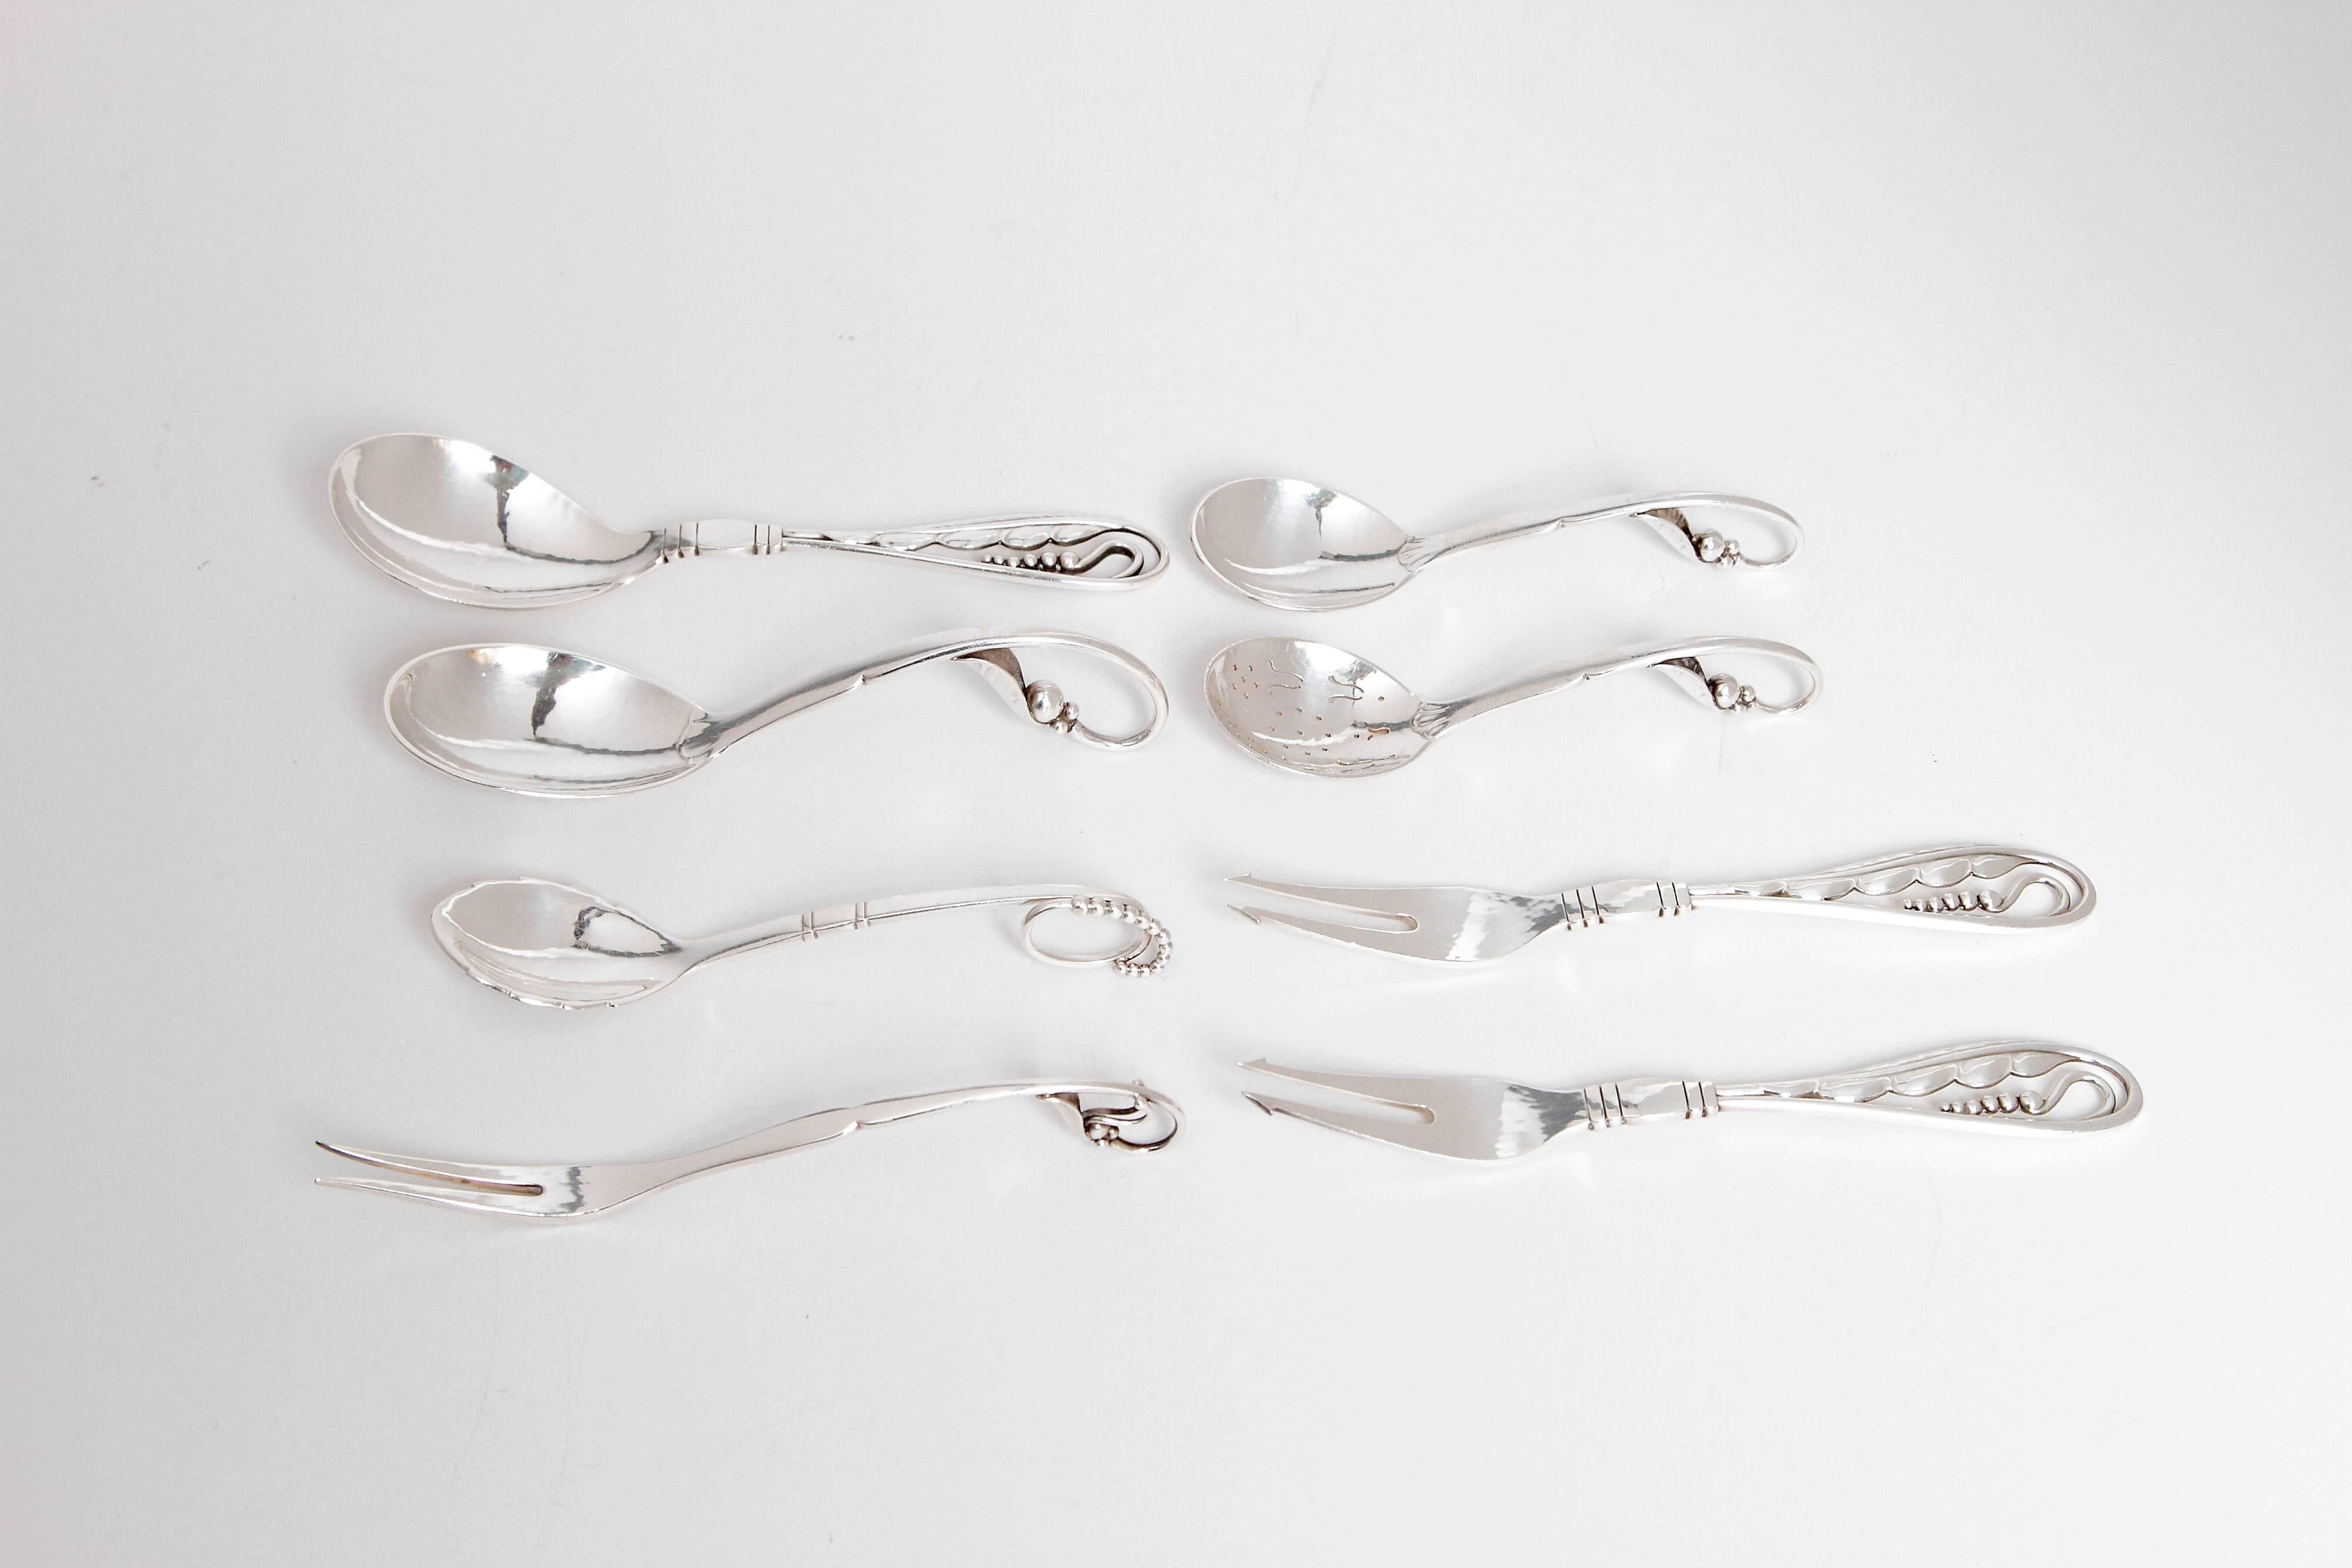 Spoons and forks sold as a set of six or separately.
Left: Georg Jensen soup spoon in the blossom pattern no. 42. The soup spoon is 5 78